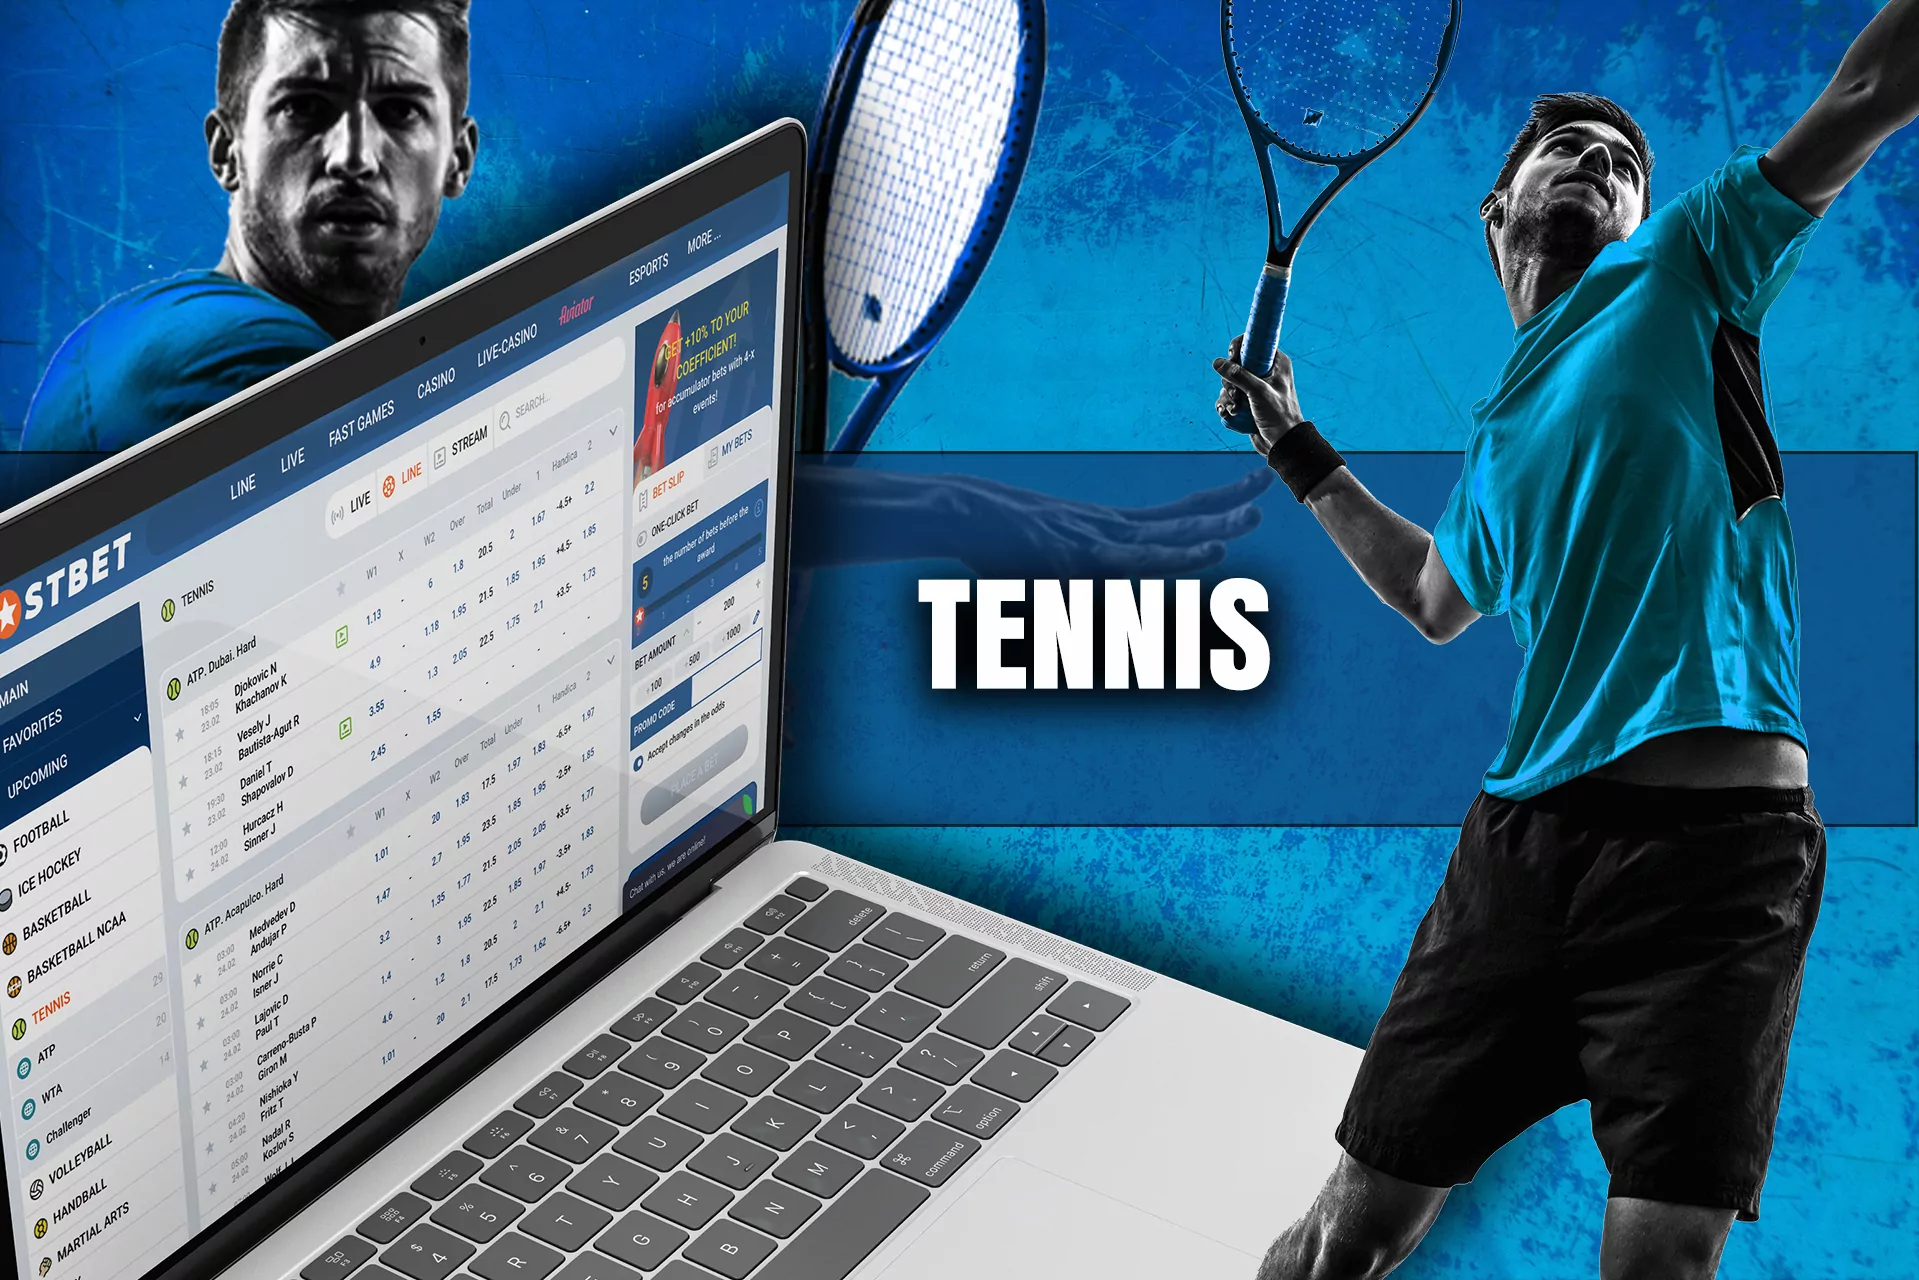 Mostbet tennis betting site is a top bookmaker in Bangladesh according Bettingonlinebd.